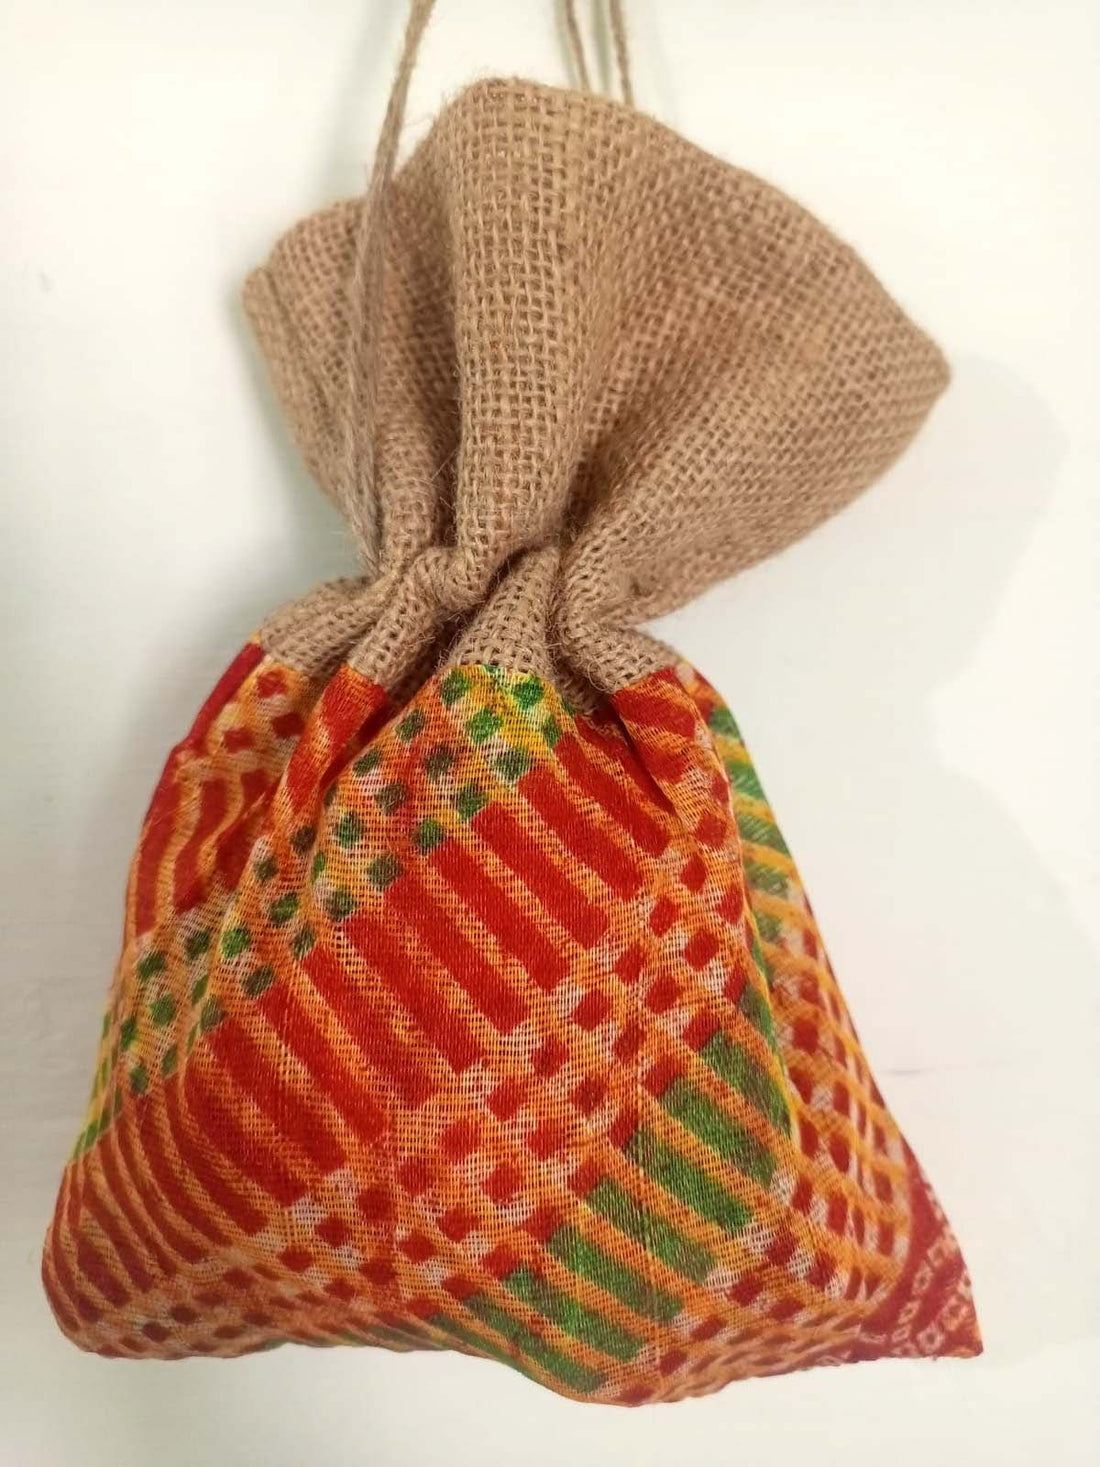 "Sustainable Elegance: 2 PC 100% Cotton Drawstring Bags from Bangalore Perfect for Jewelry, Wedding Favors, and Eco-Friendly Packaging"